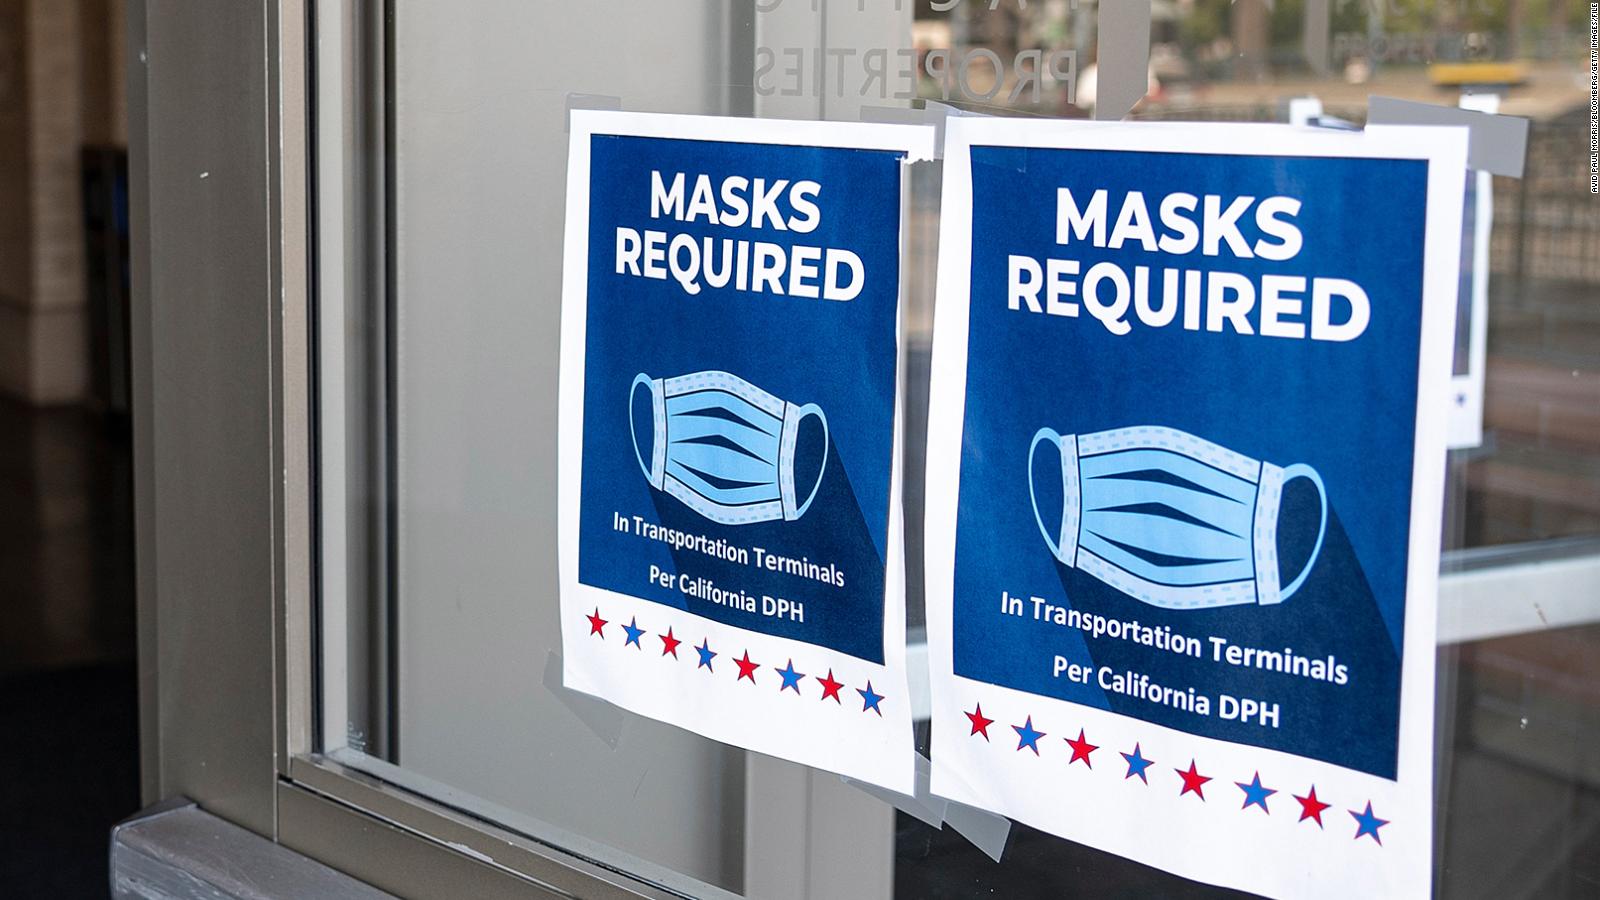 Bay Area counties under indoor mask mandate as Covid19 cases surge CNN